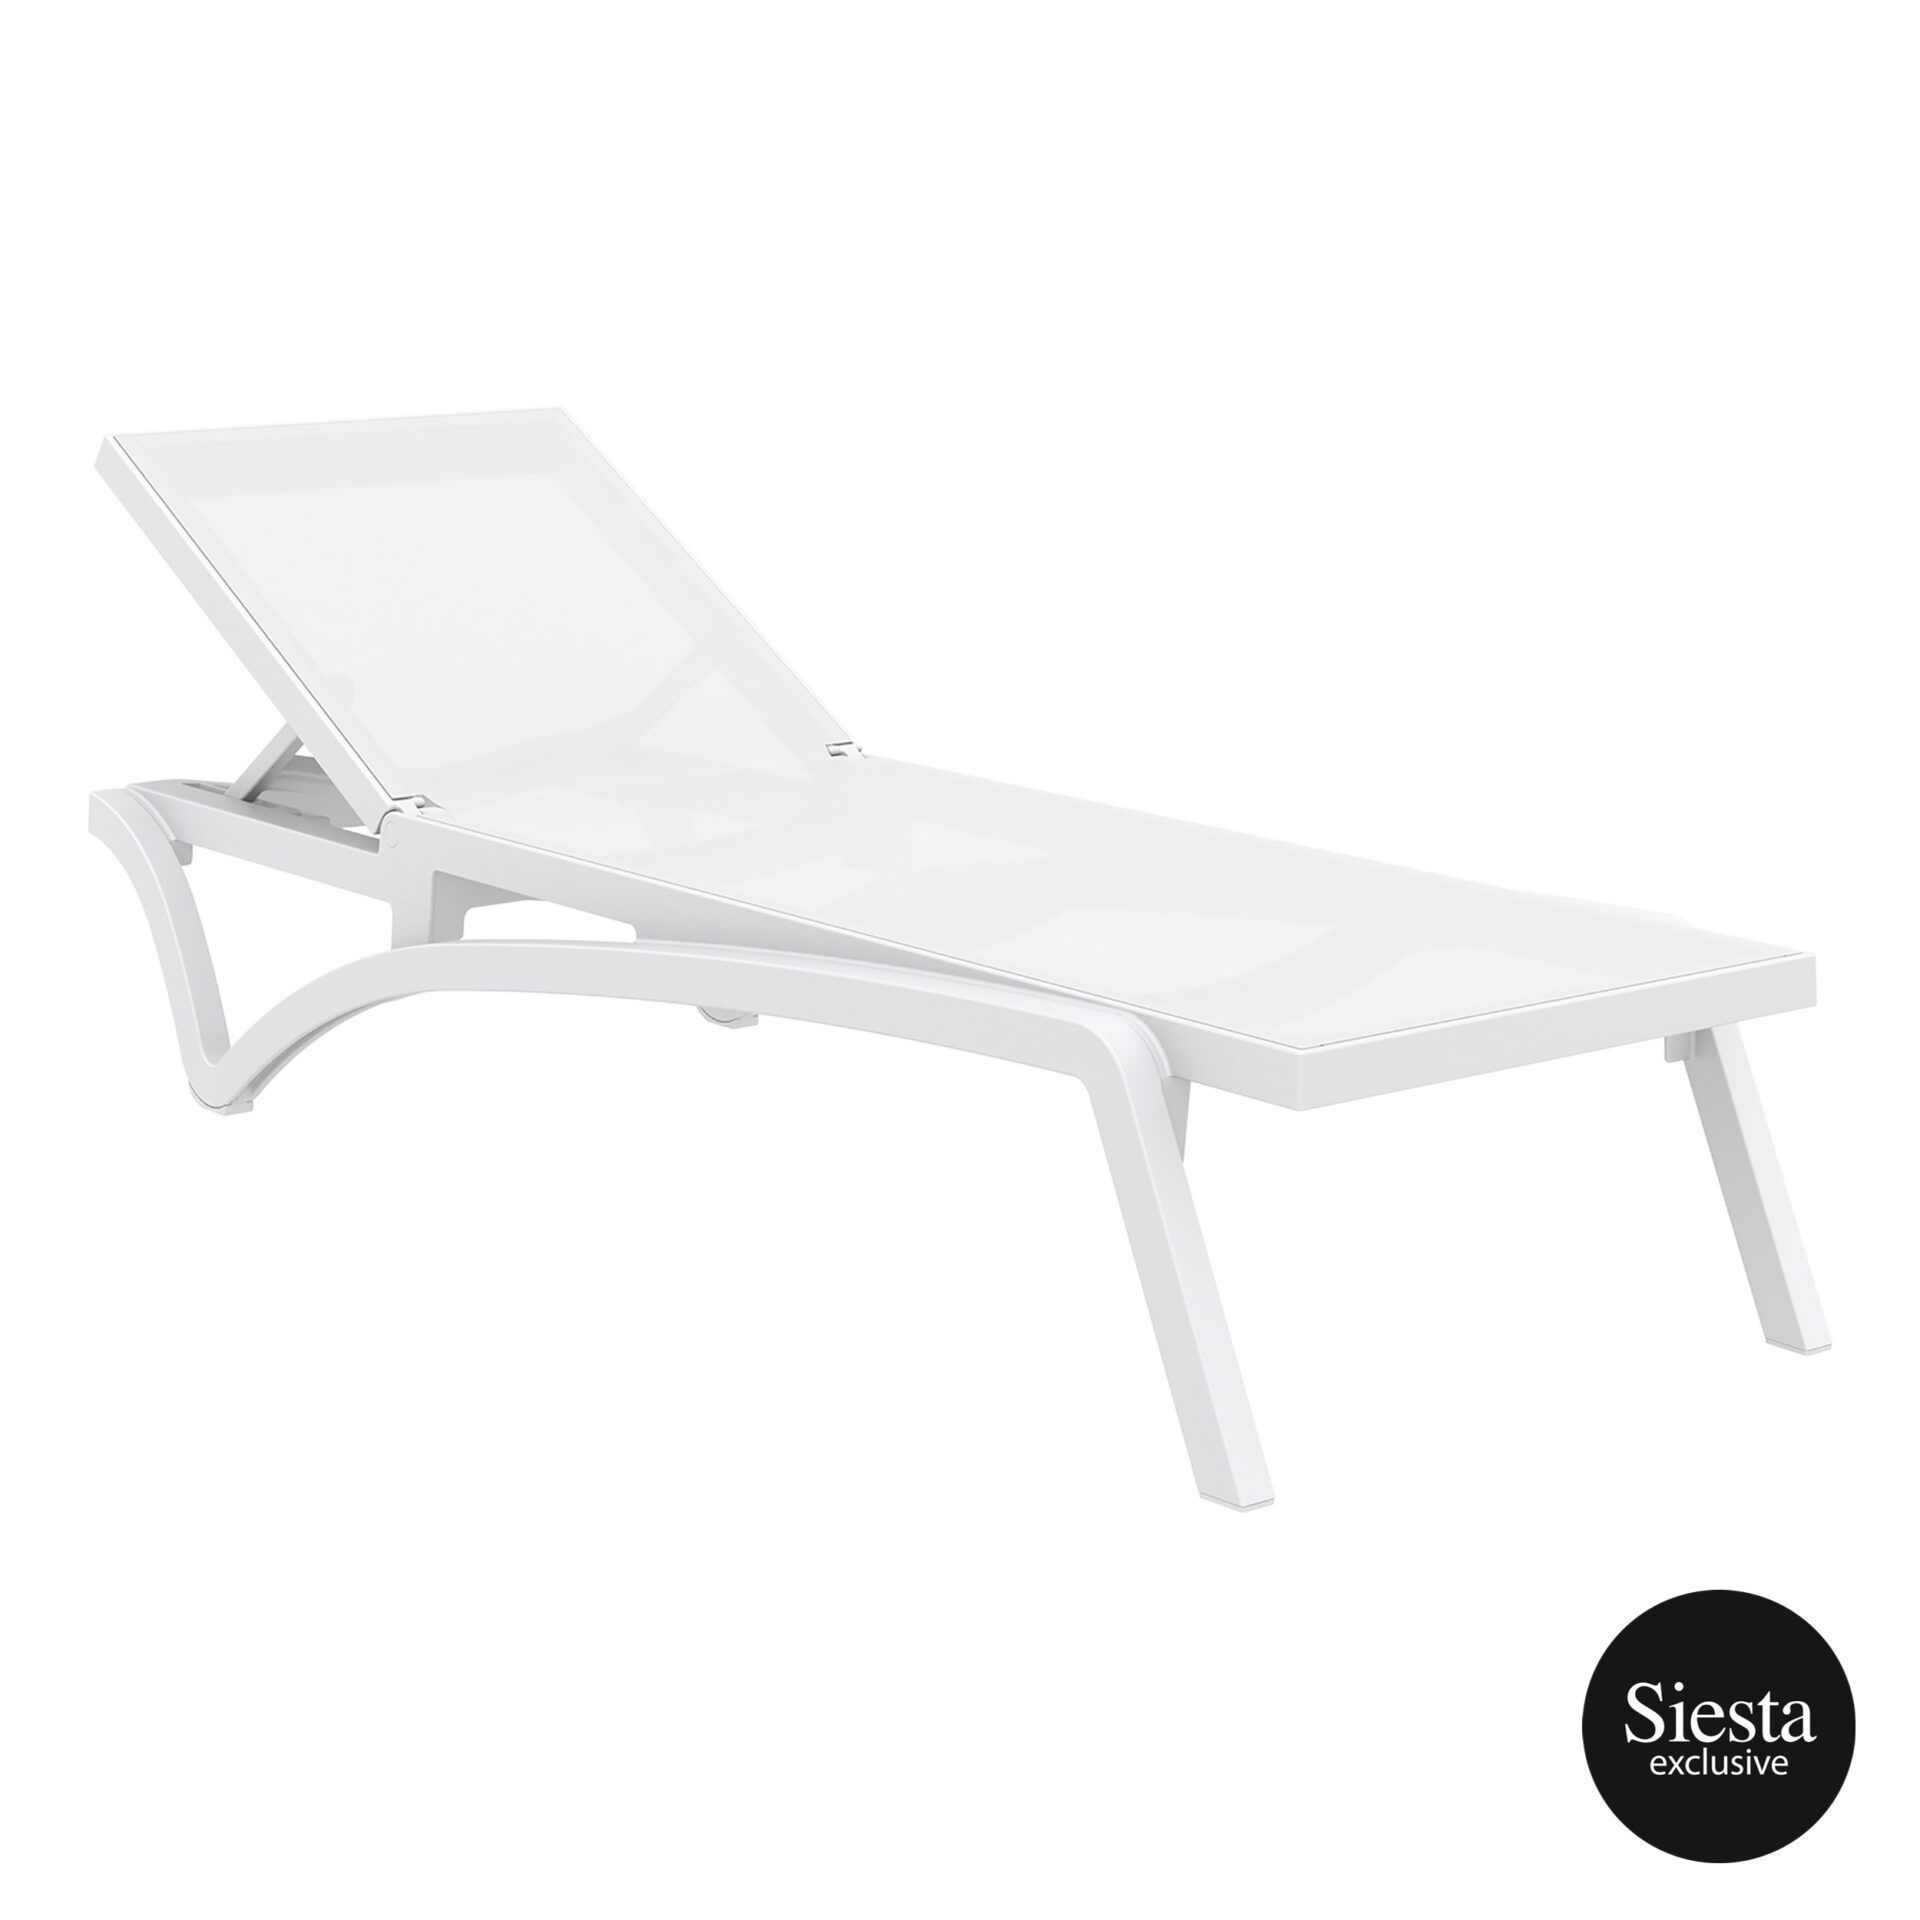 pool deck commercial pacific sunlounger white white front side